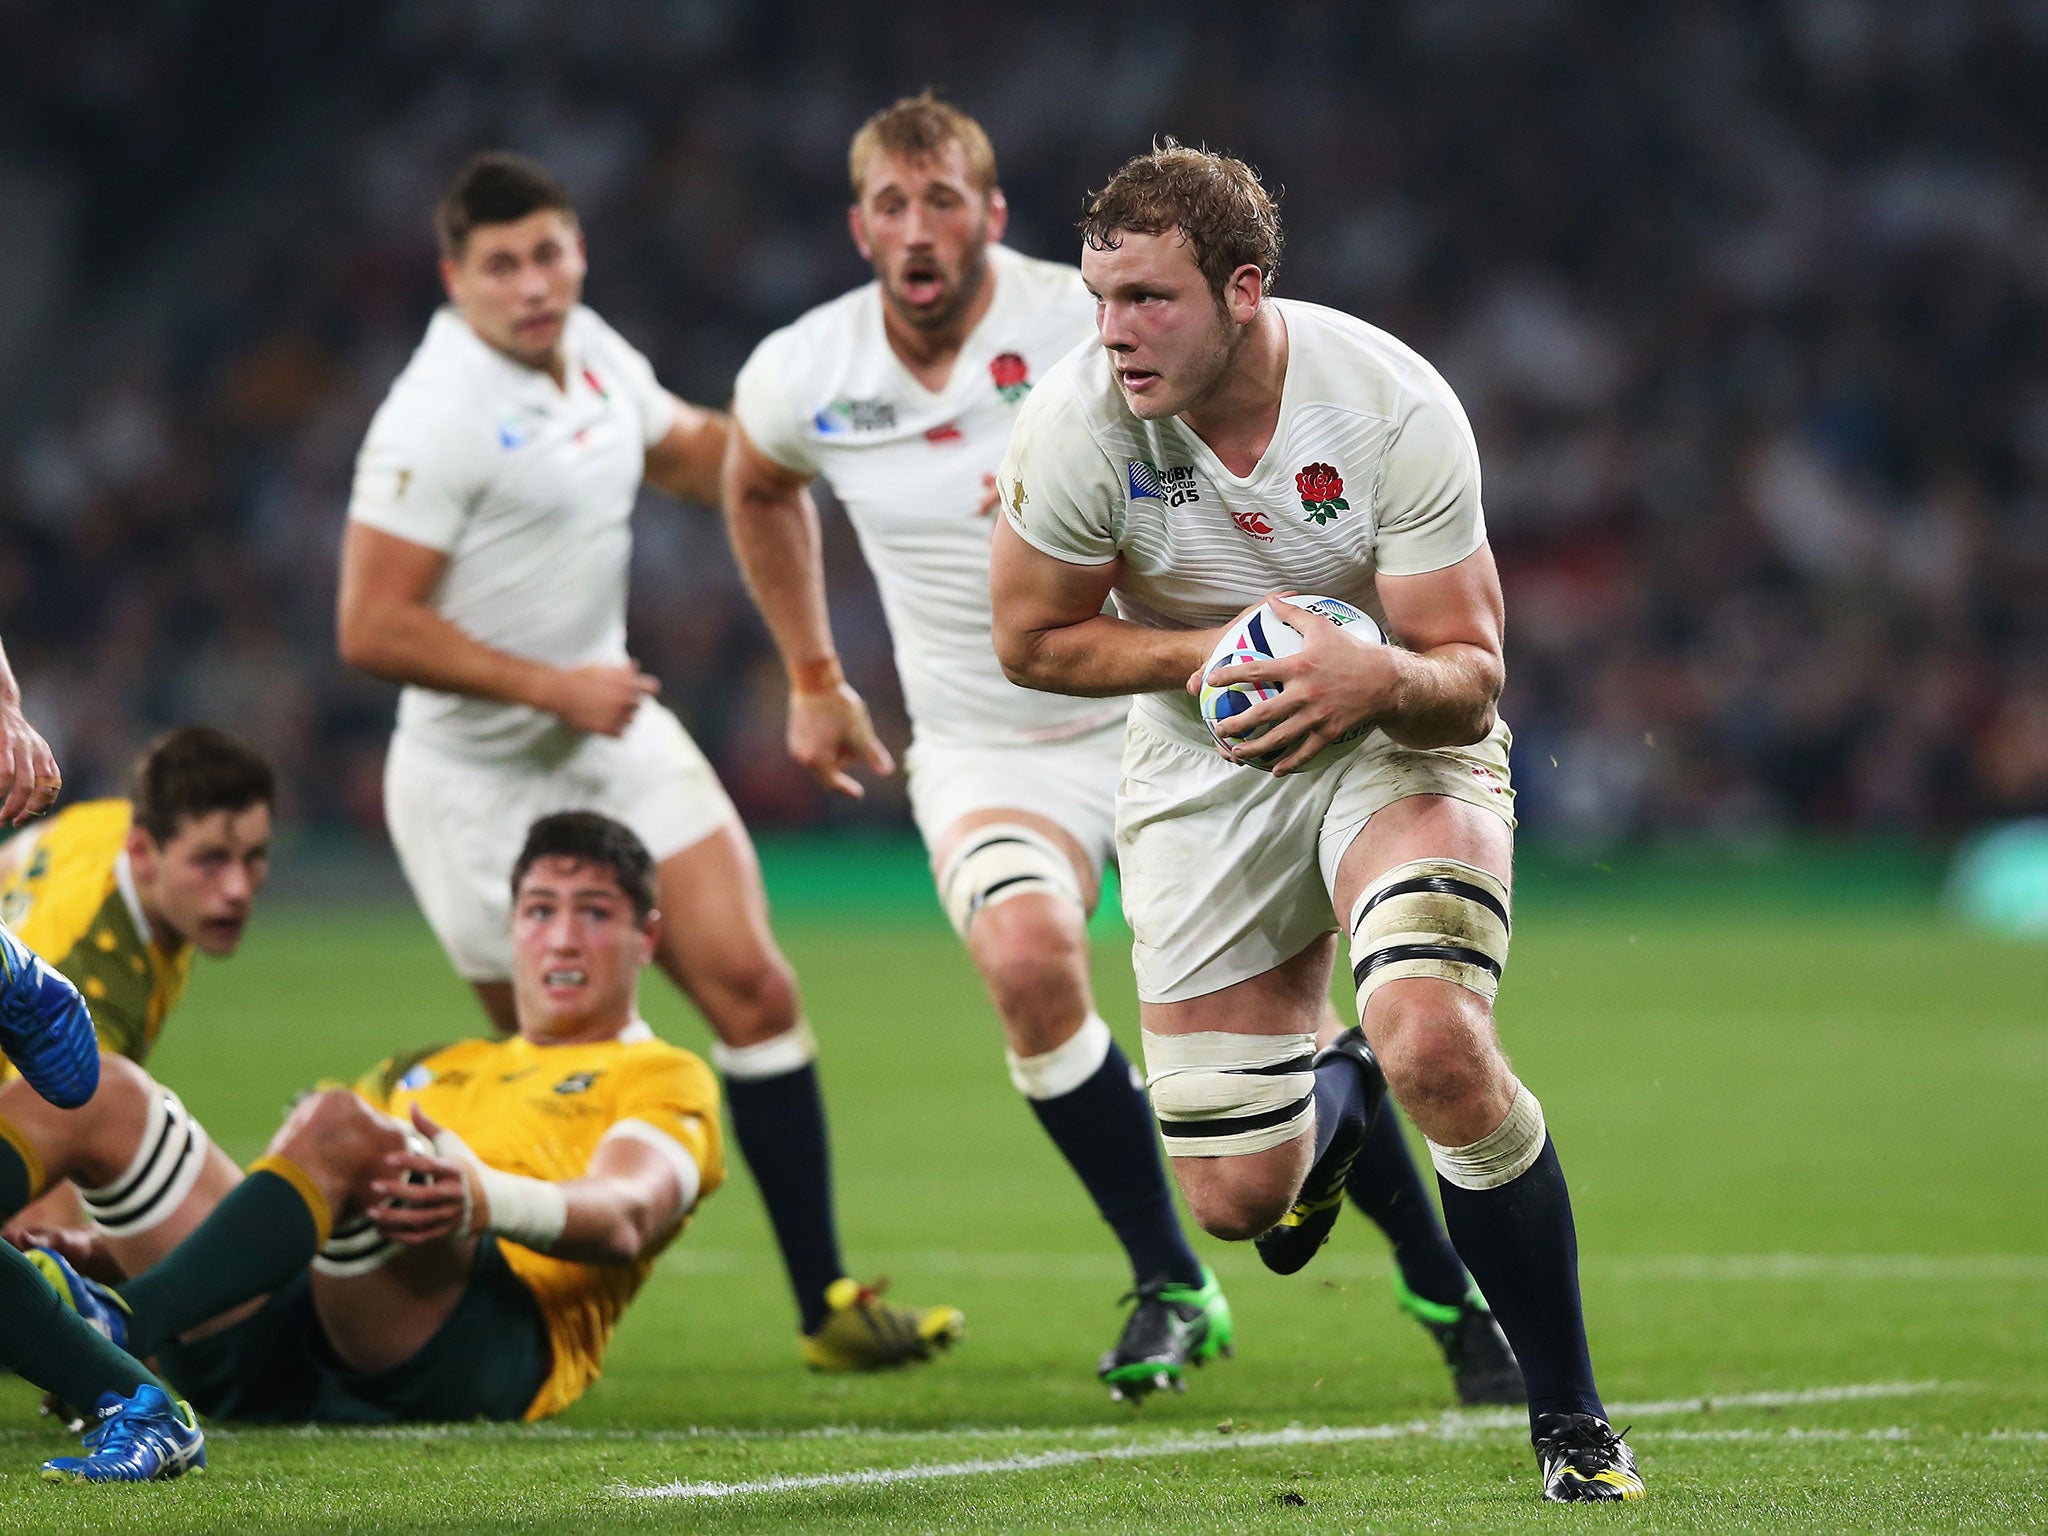 Joe Launchbury was named man of the match in the defeat by Australia